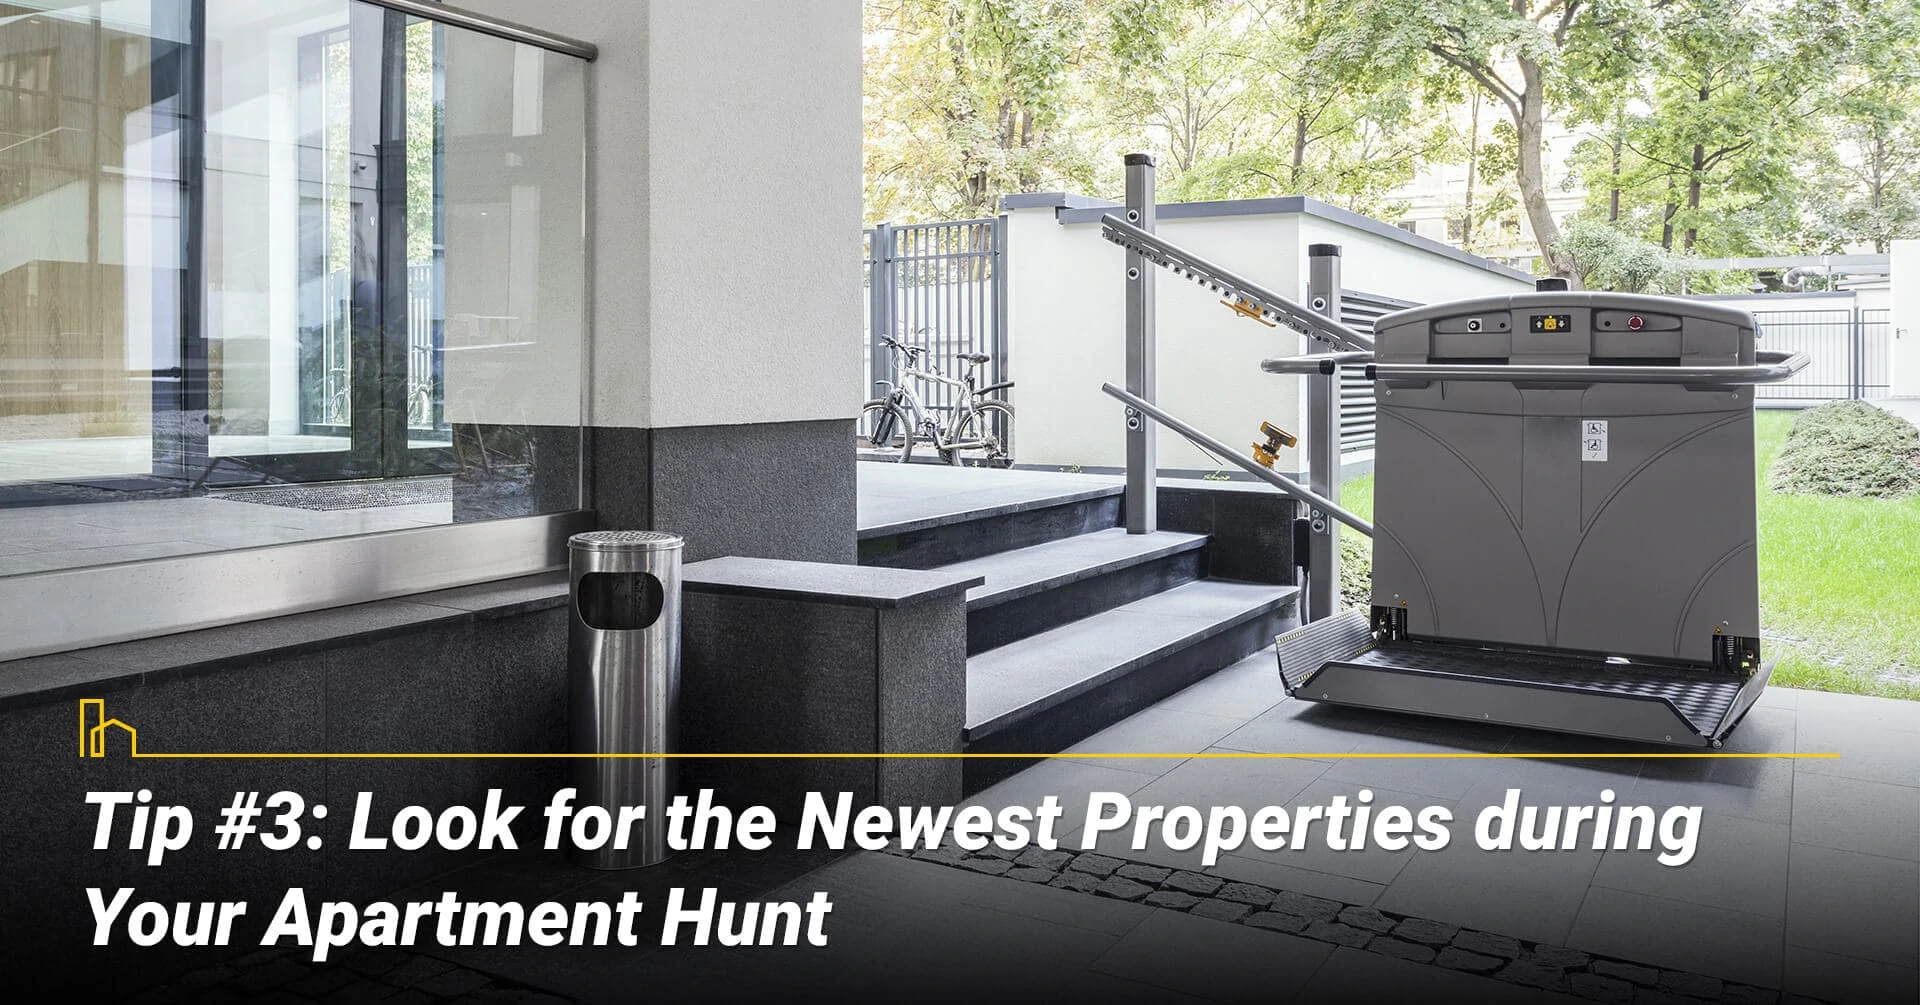 Tip #3: Look for the Newest Properties during Your Apartment Hunt, look for new properties